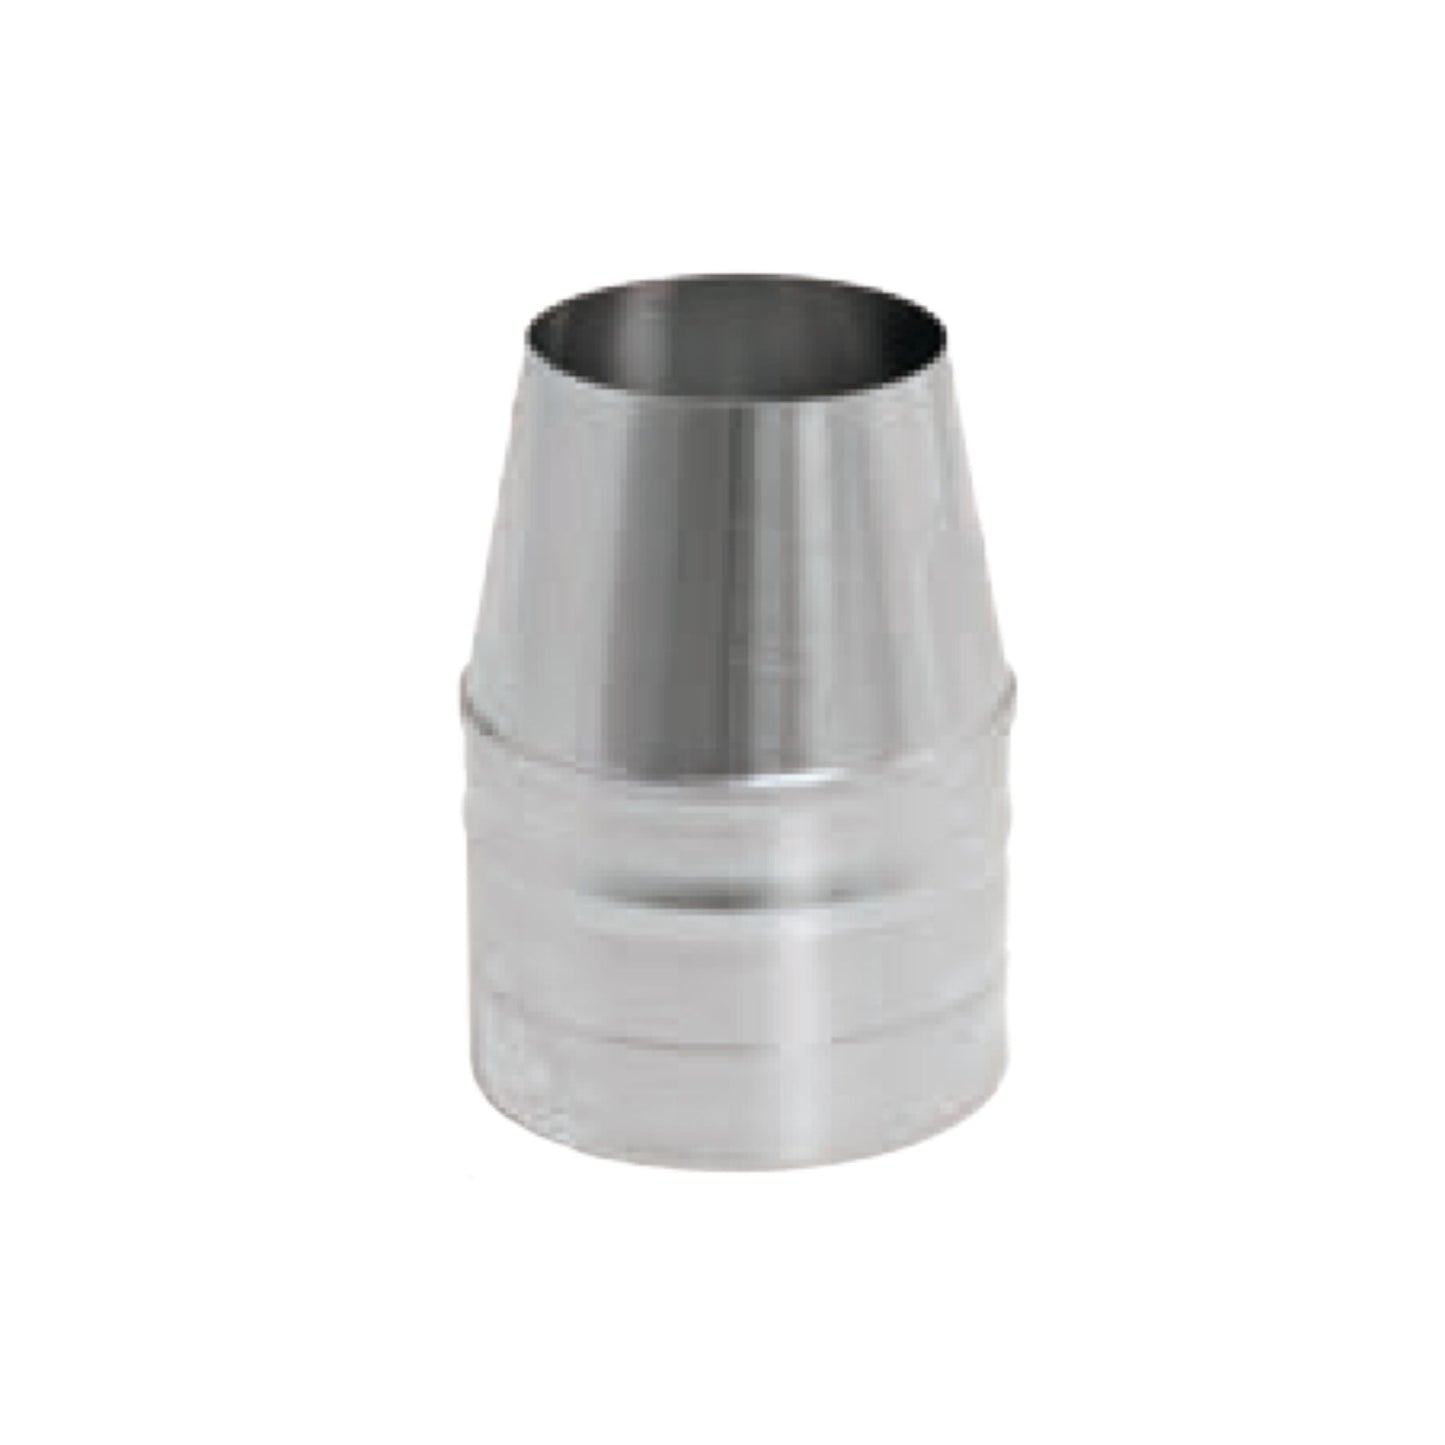 DuraVent FasNSeal 12" x 6" 29-4C Stainless Steel Termination Cone